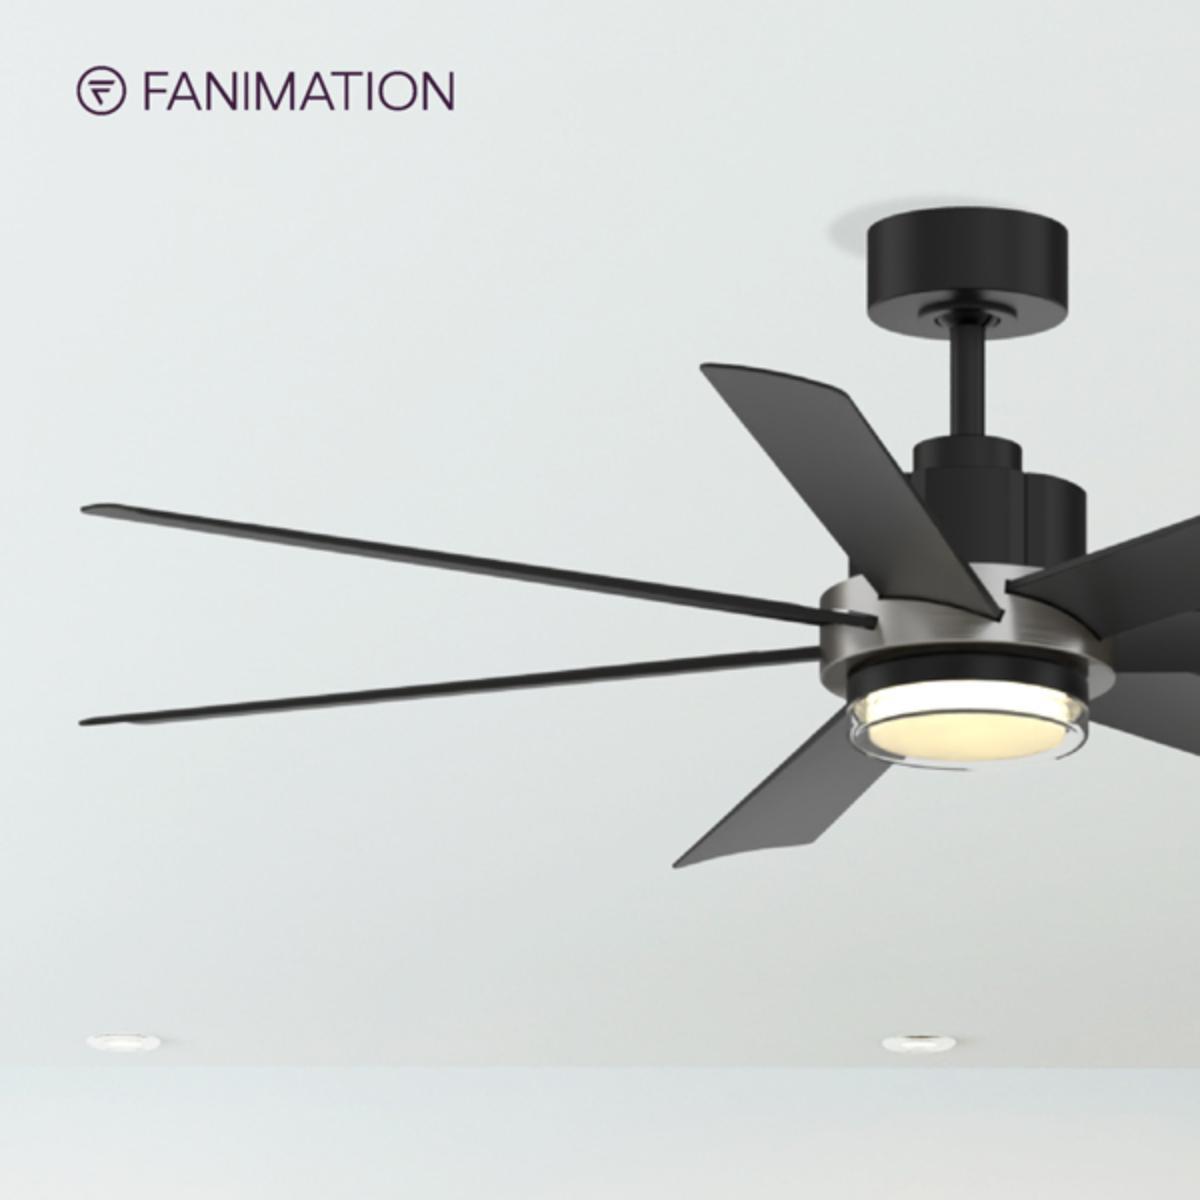 Pendry 56 inch Indoor/Outdoor Ceiling Fan with Remote, Black and Brushed Nickel Finish - Bees Lighting